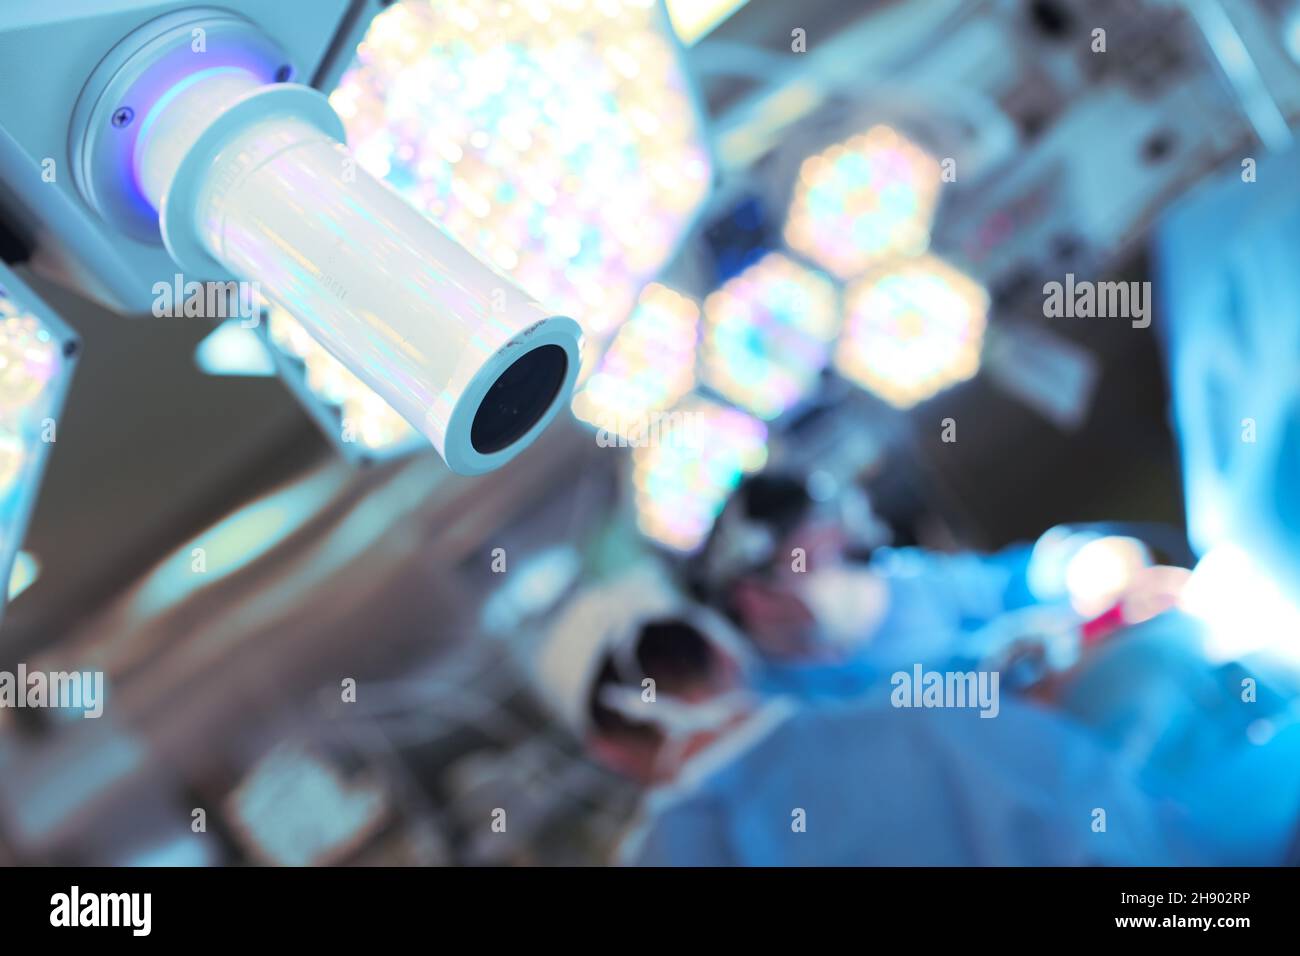 Blurred surgeons in the operating room and surgical lamp close-up. Stock Photo